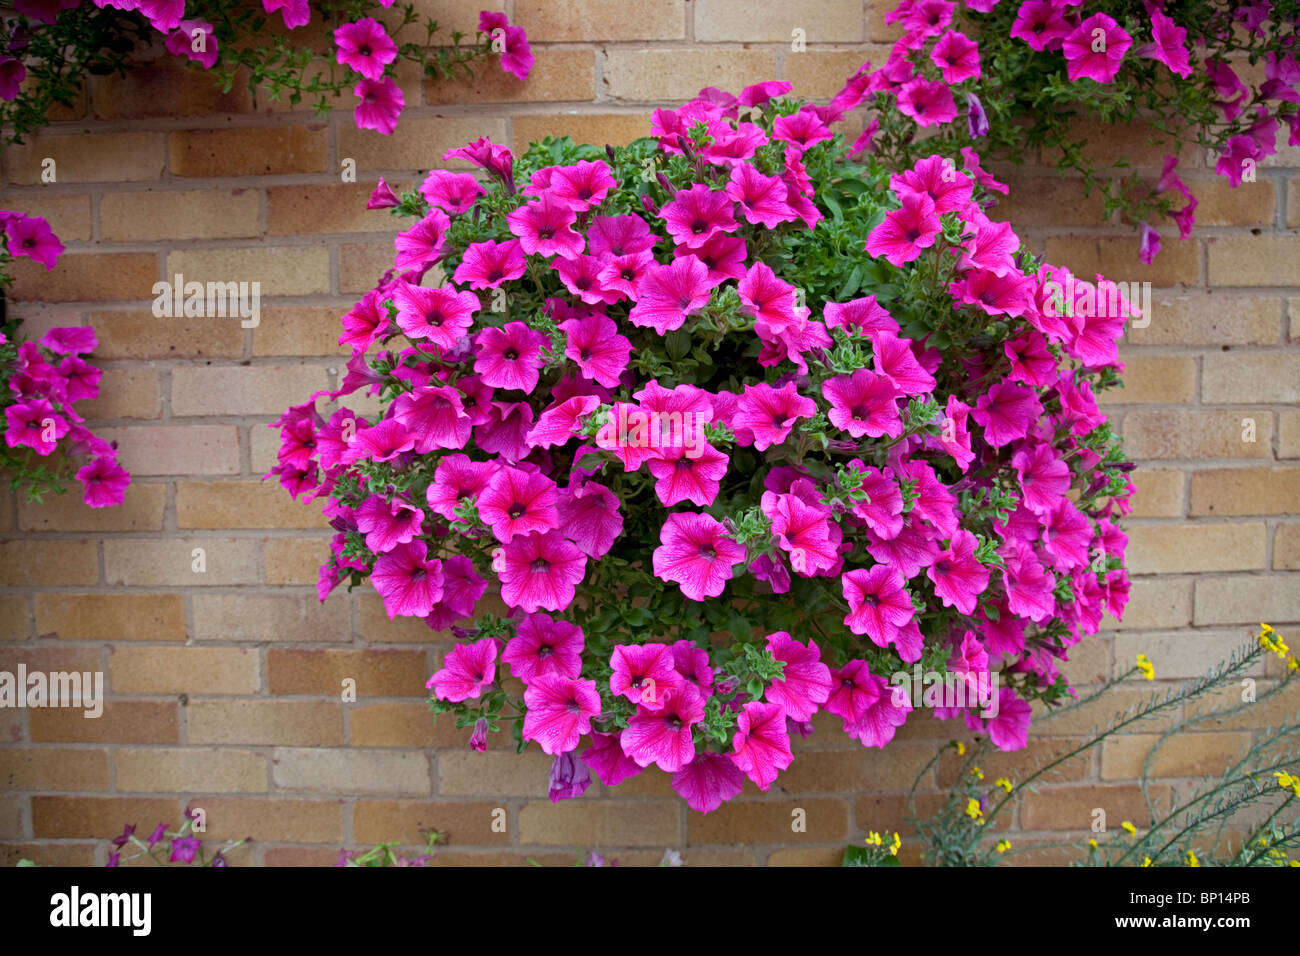 Colourful display of Petunias in garden of small bungalow Cheltenham UK Stock Photo